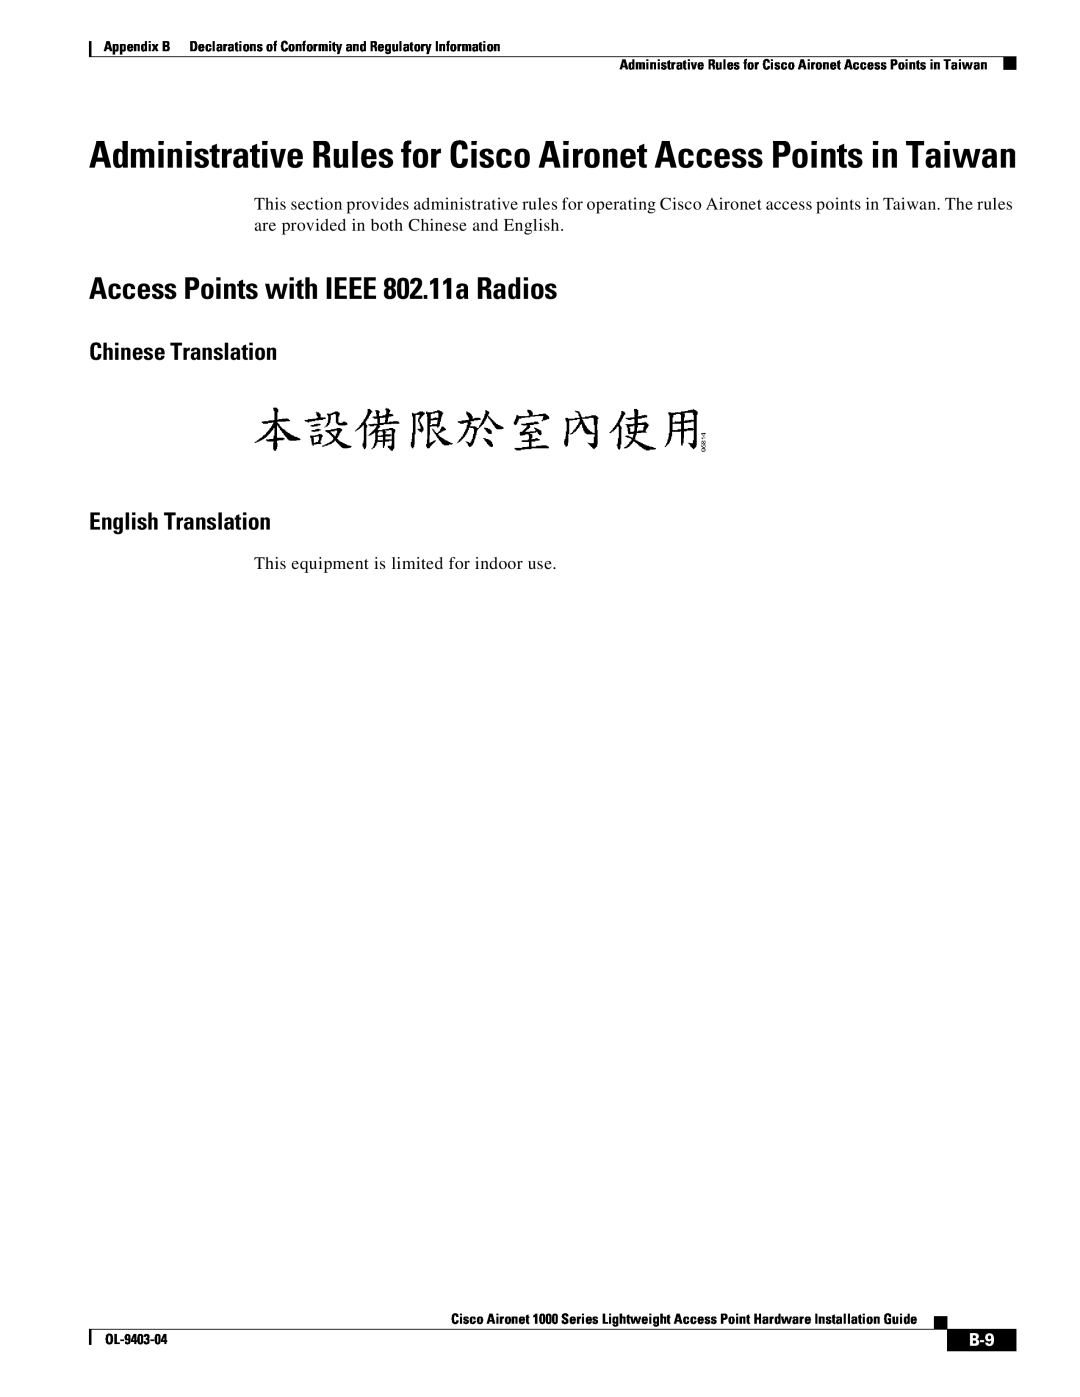 Cisco Systems 2000 Administrative Rules for Cisco Aironet Access Points in Taiwan, Access Points with IEEE 802.11a Radios 